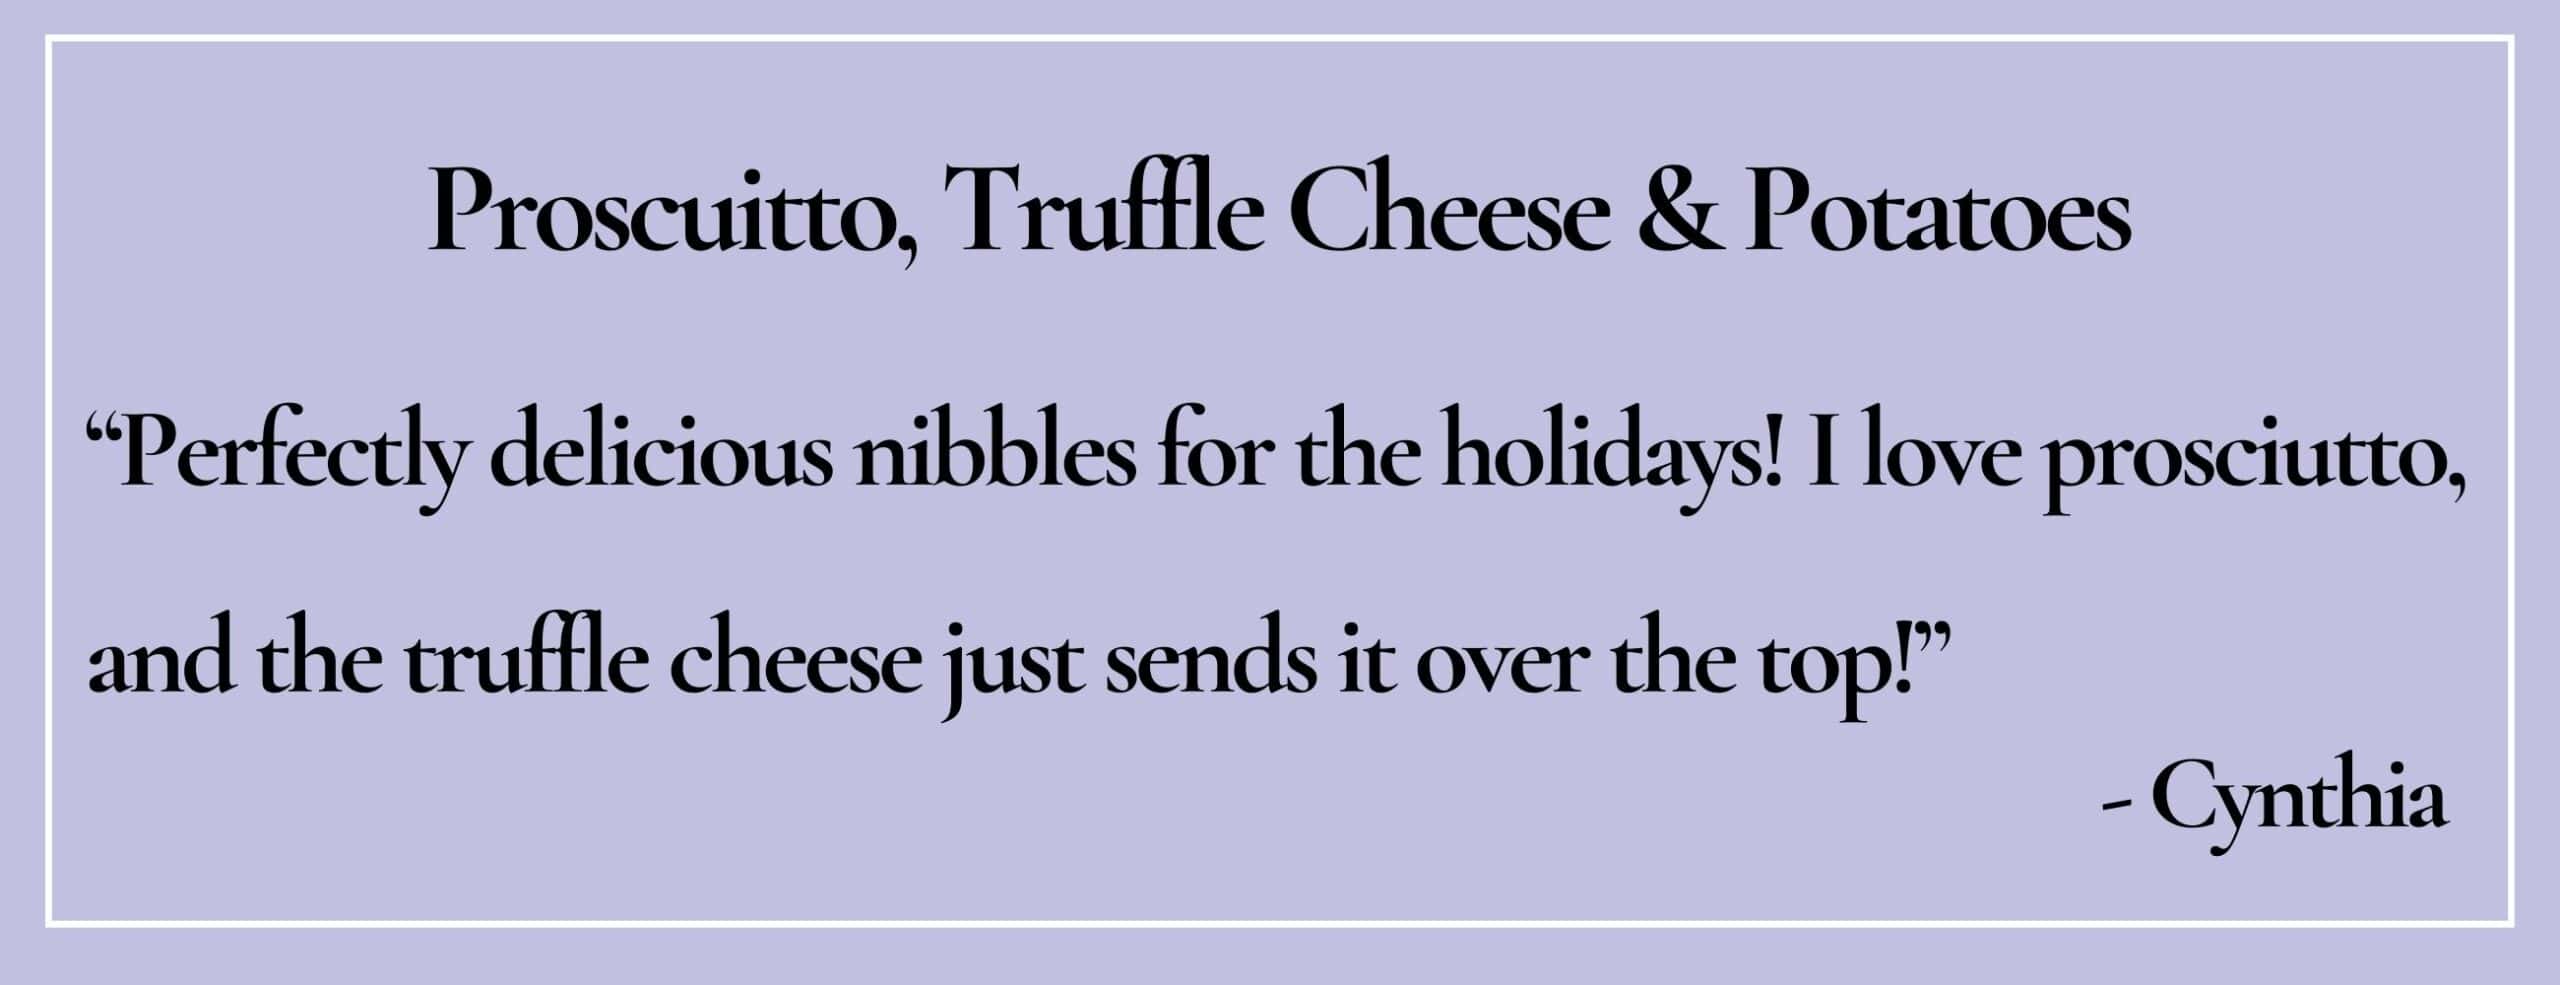 text box with paraphrase: I love prosciutto, and the truffle cheese just sends it over the top!- Cynthia